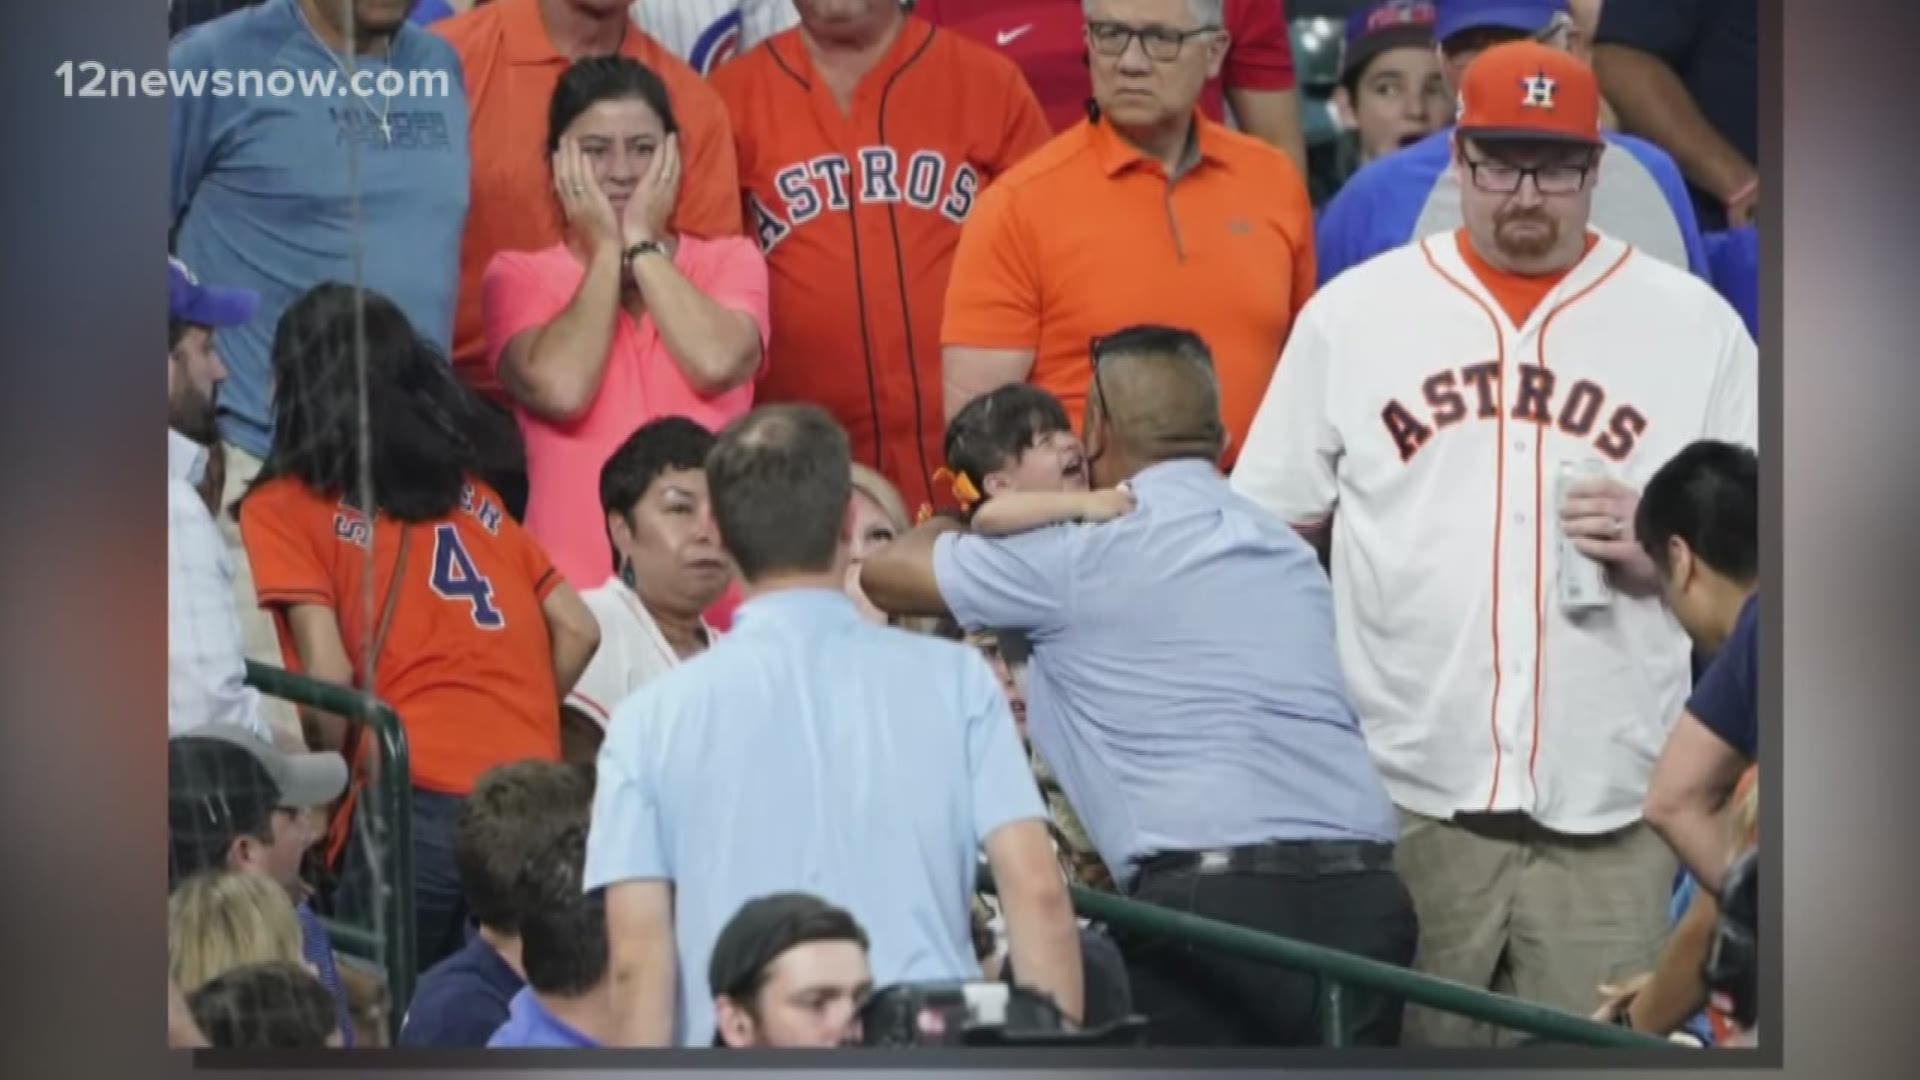 The MLB has since added extended netting to all stadiums due to similar incidents.